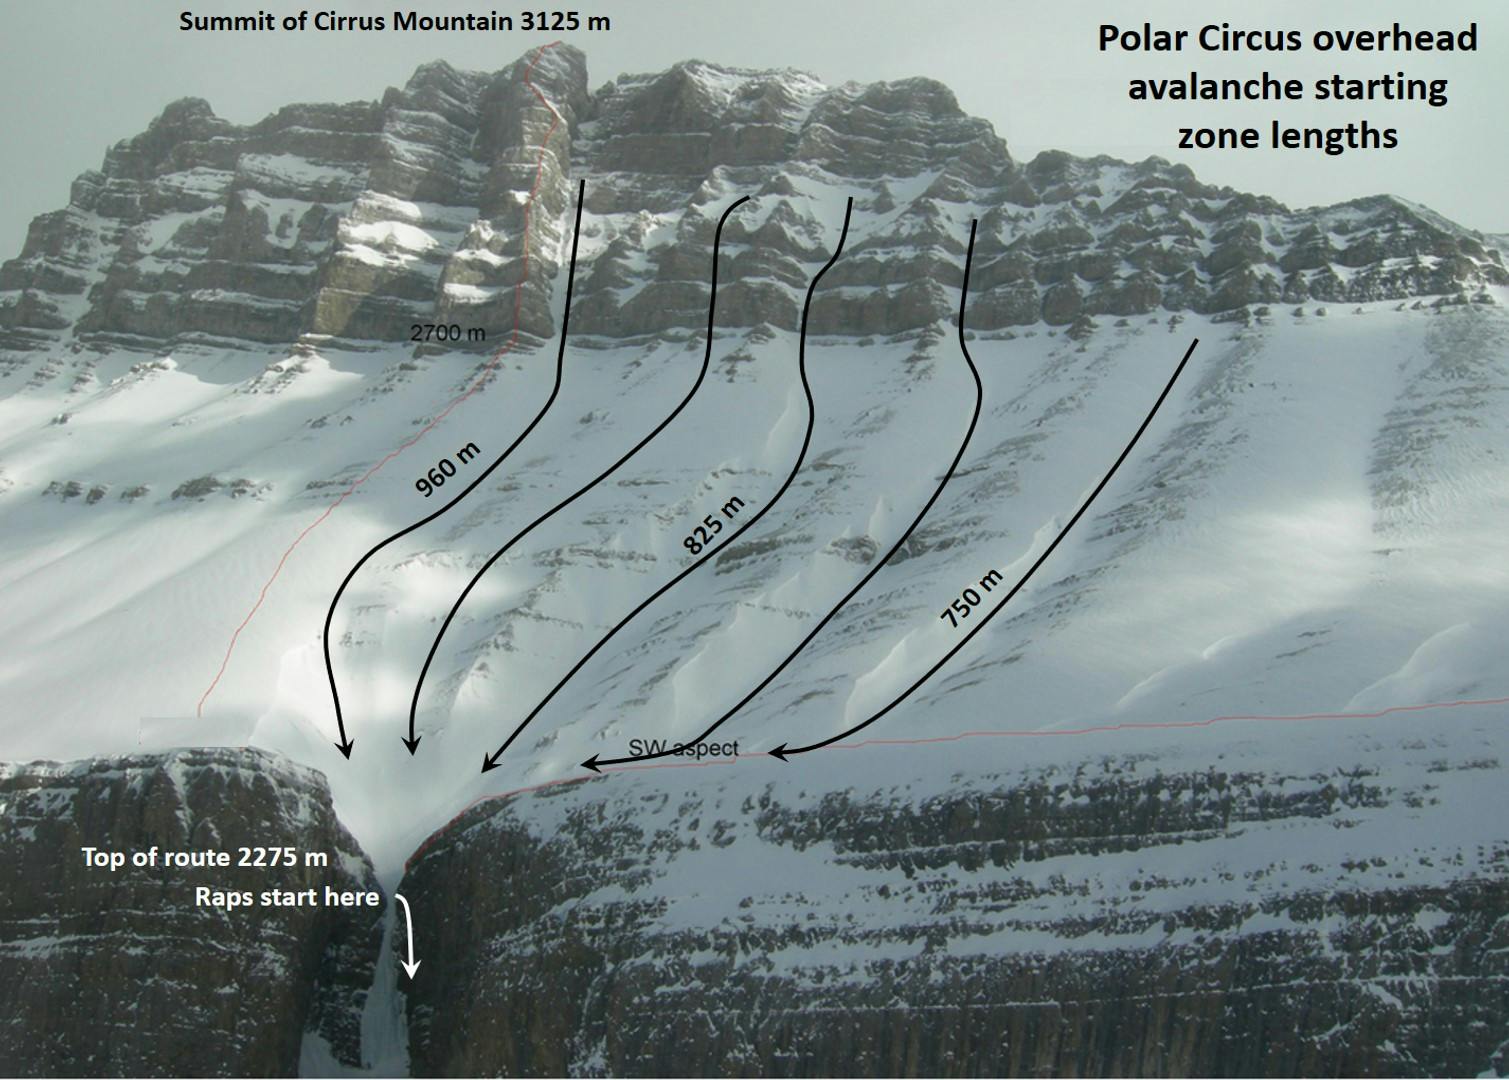 Diagram shows length of avalanche start zones above the climb, there are 5 avalanche paths marked with black lines. The first is labelled 960m, the third 825m and the final one 750m. They funnel into the top of the route. 